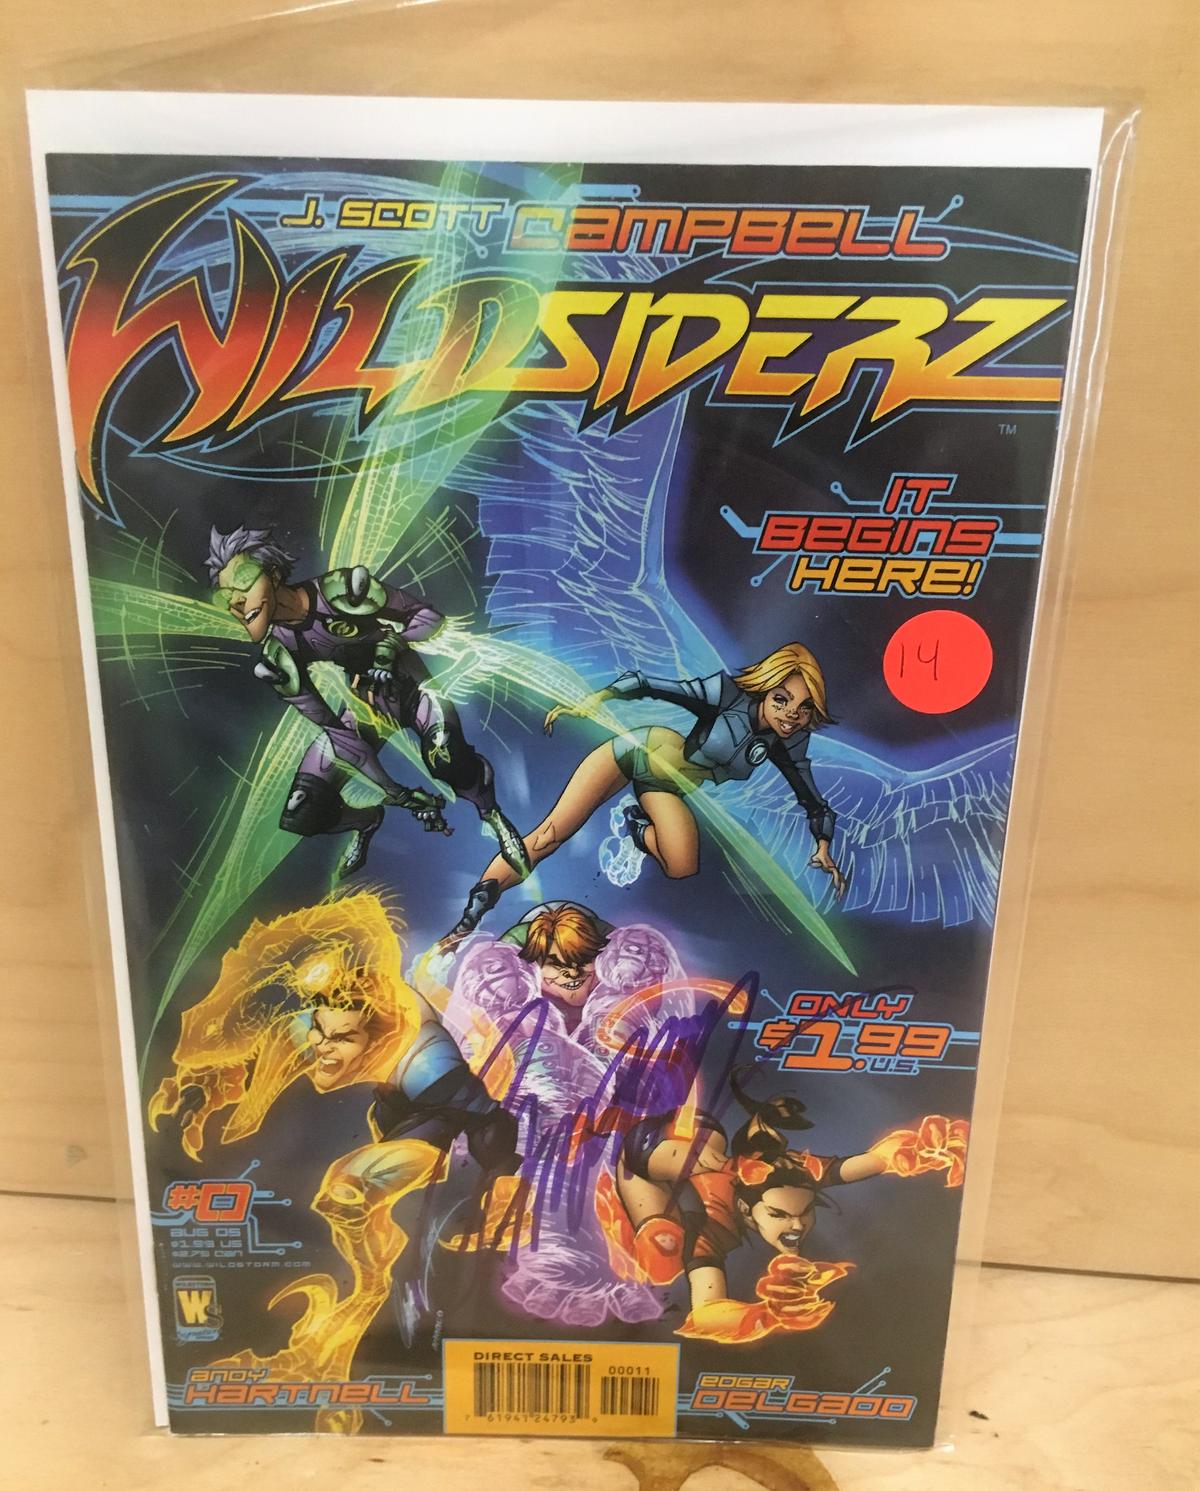 Wildsiderz #0 signed by J. Scott Campbell